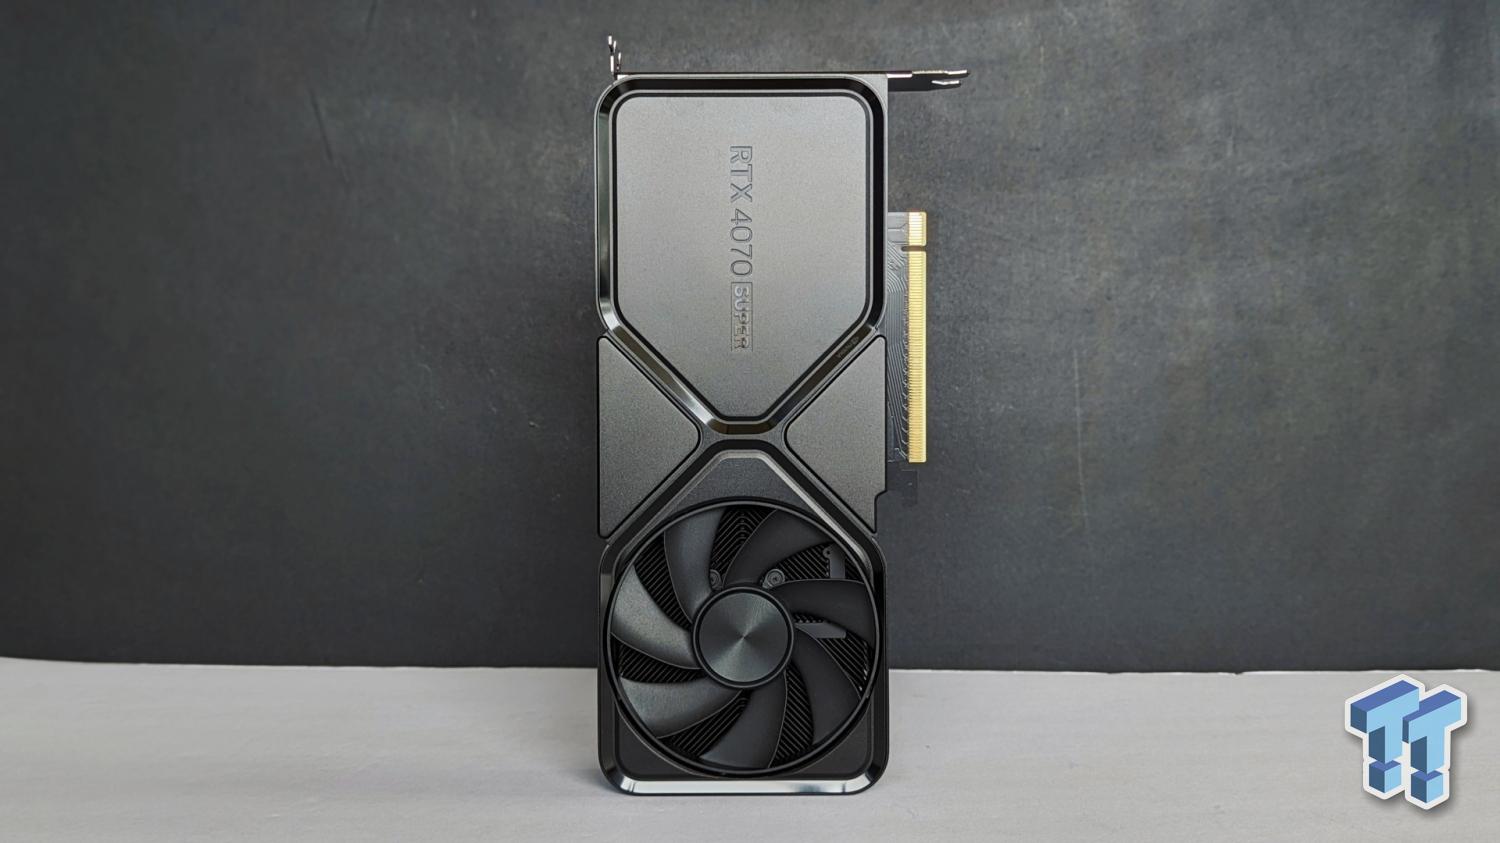 Nvidia GeForce RTX 4070 Super Founders Edition review: A true upgrade -  Dexerto